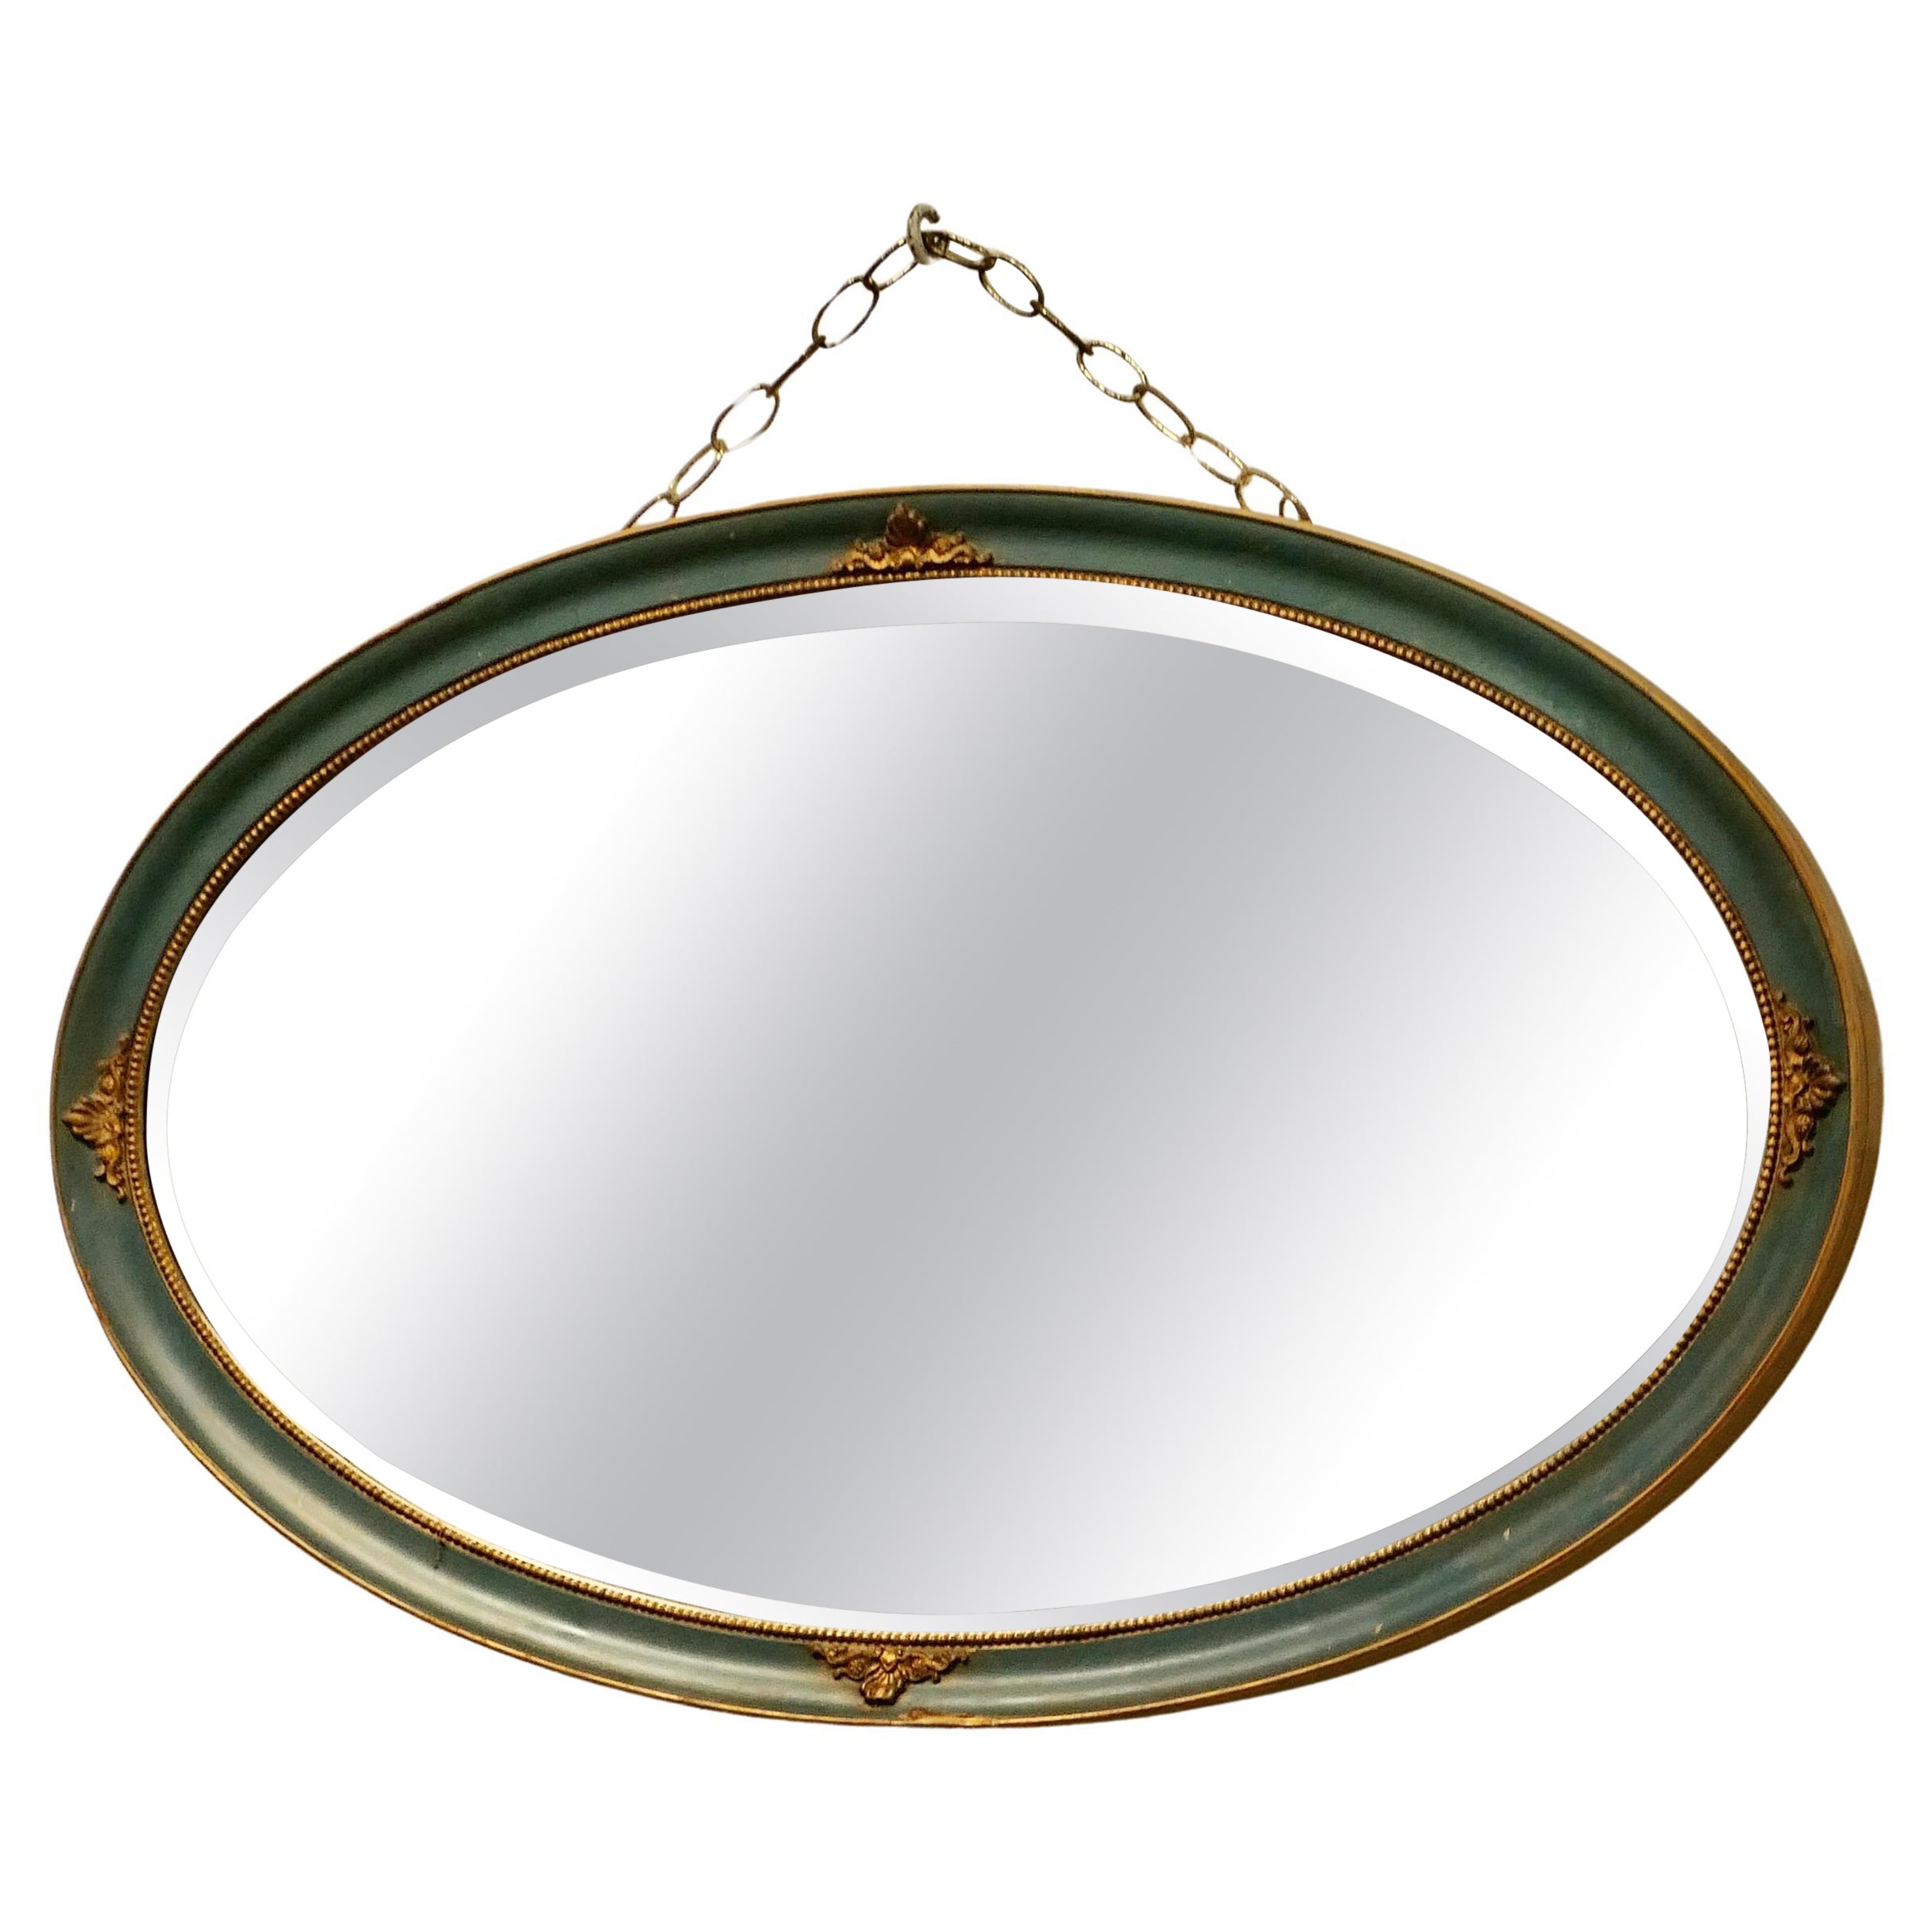 Oval Gilt and Painted Wall Mirror  This Mirror has a moulded oval frame  